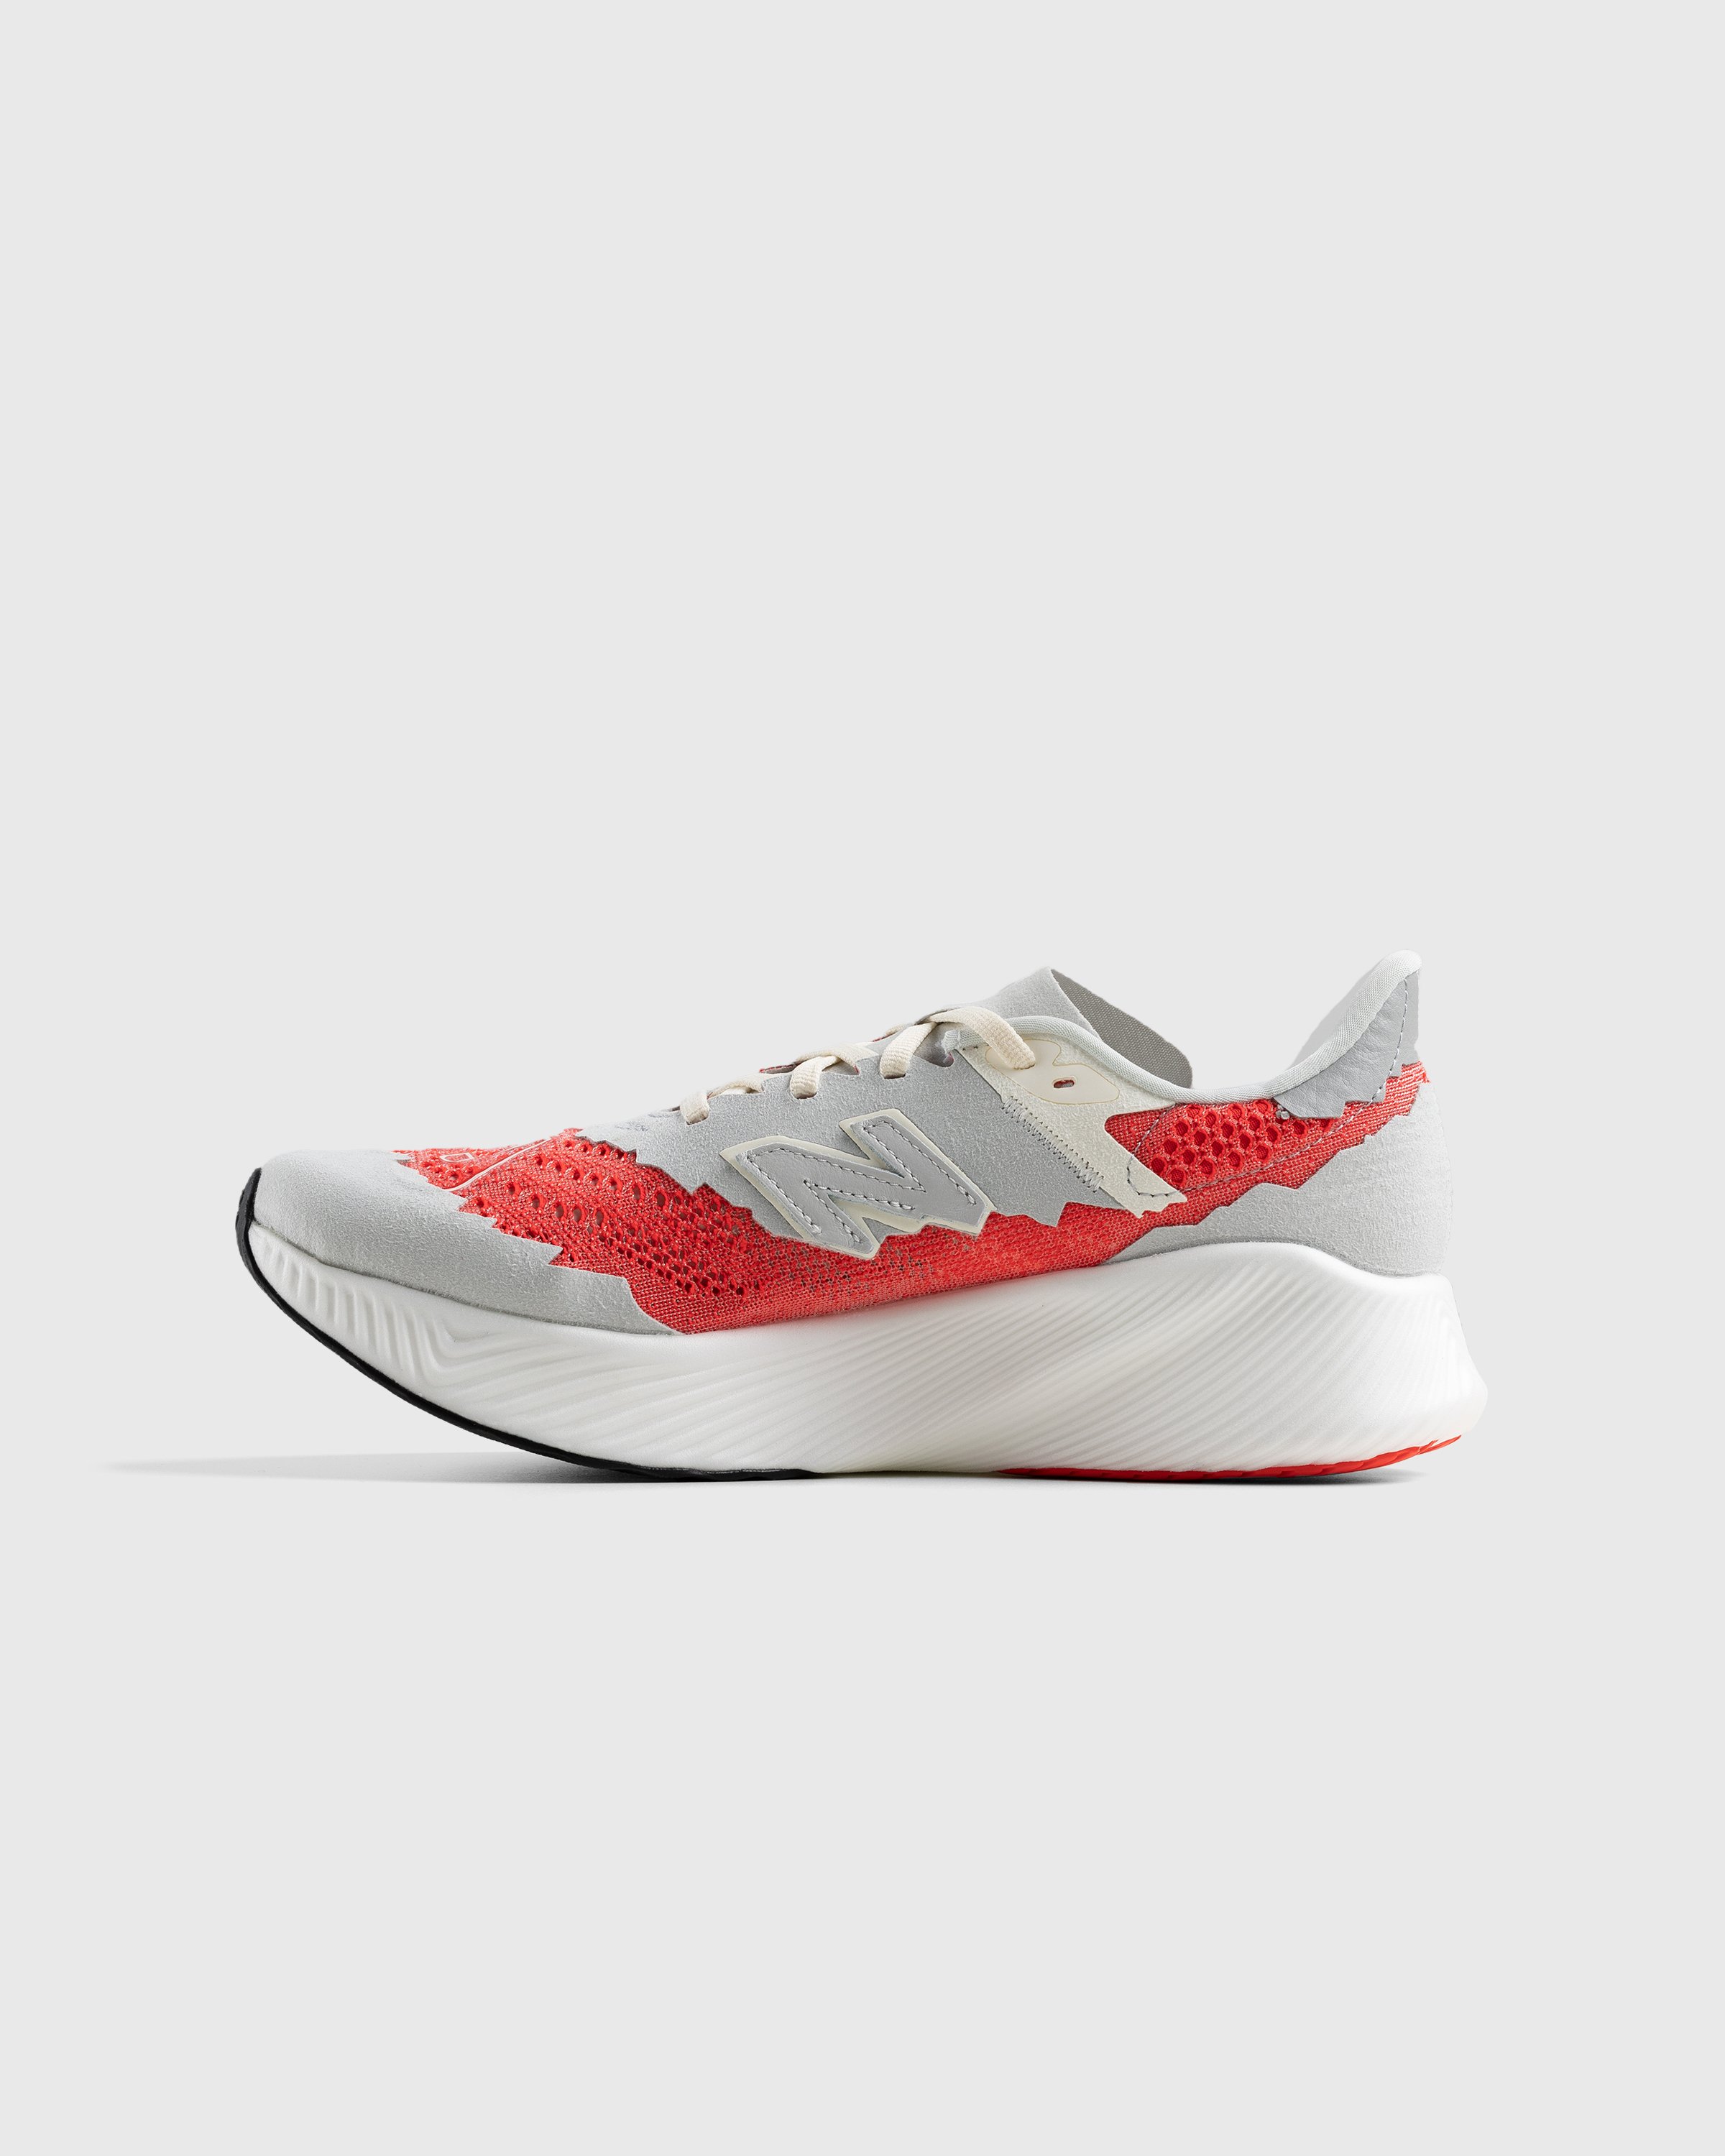 New Balance x Stone Island - FuelCell RC Elite v2 Neo Flame - Footwear - Red - Image 2